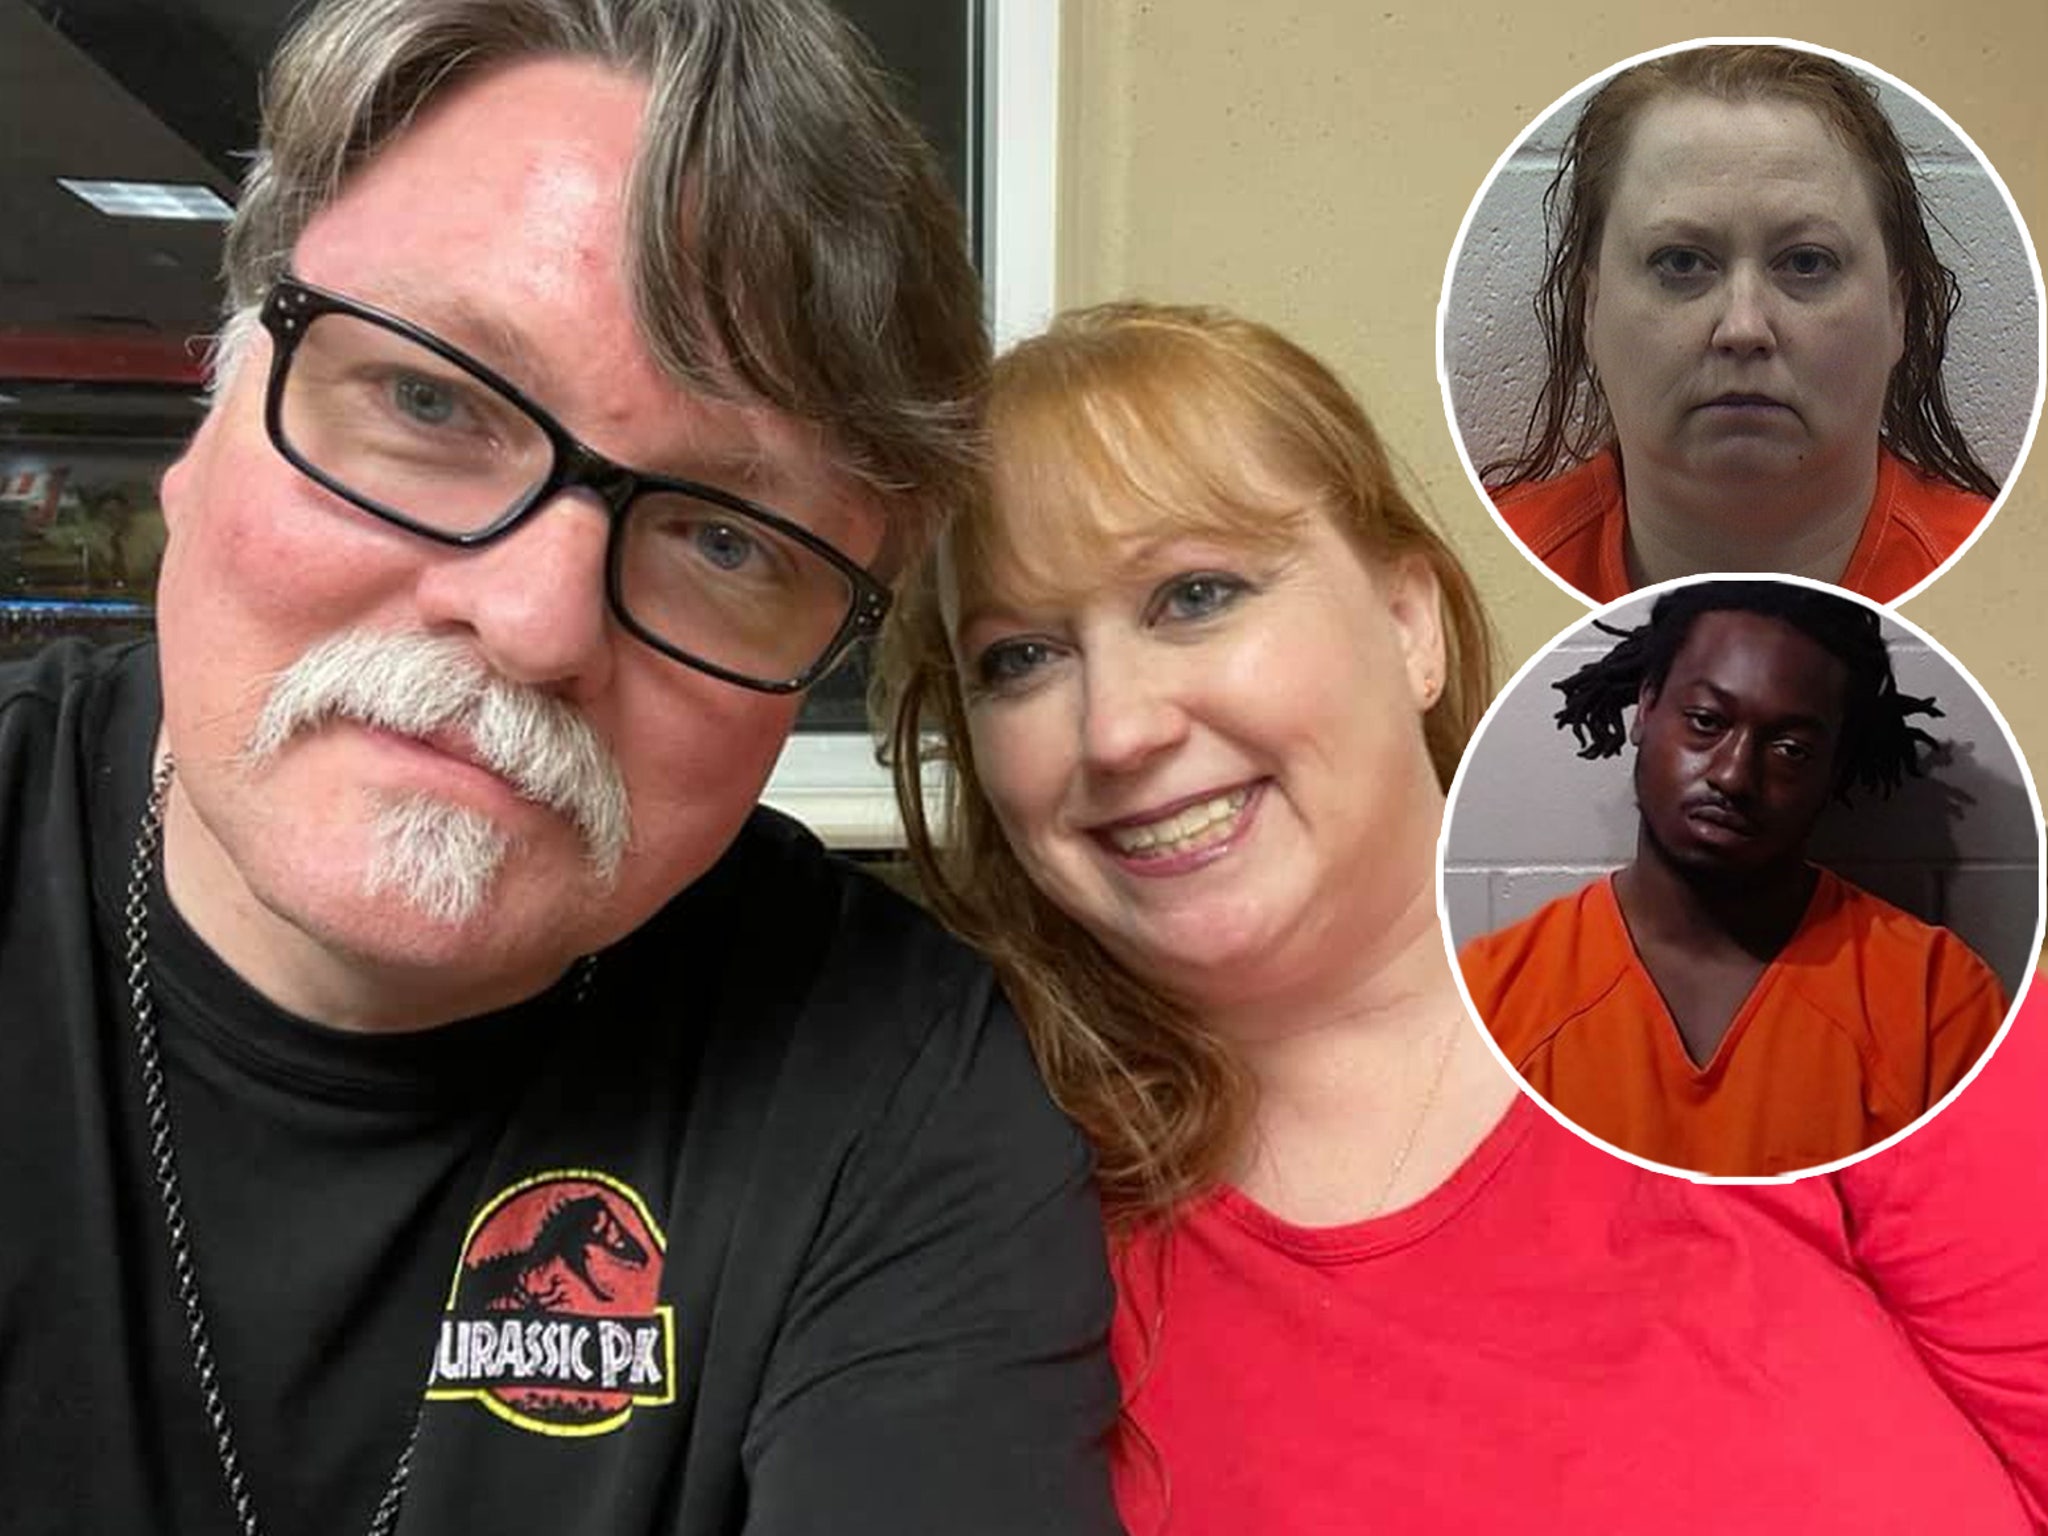 Pastors Wife and Her Lover Accused of Killing Husband After Multiple Threesomes Together